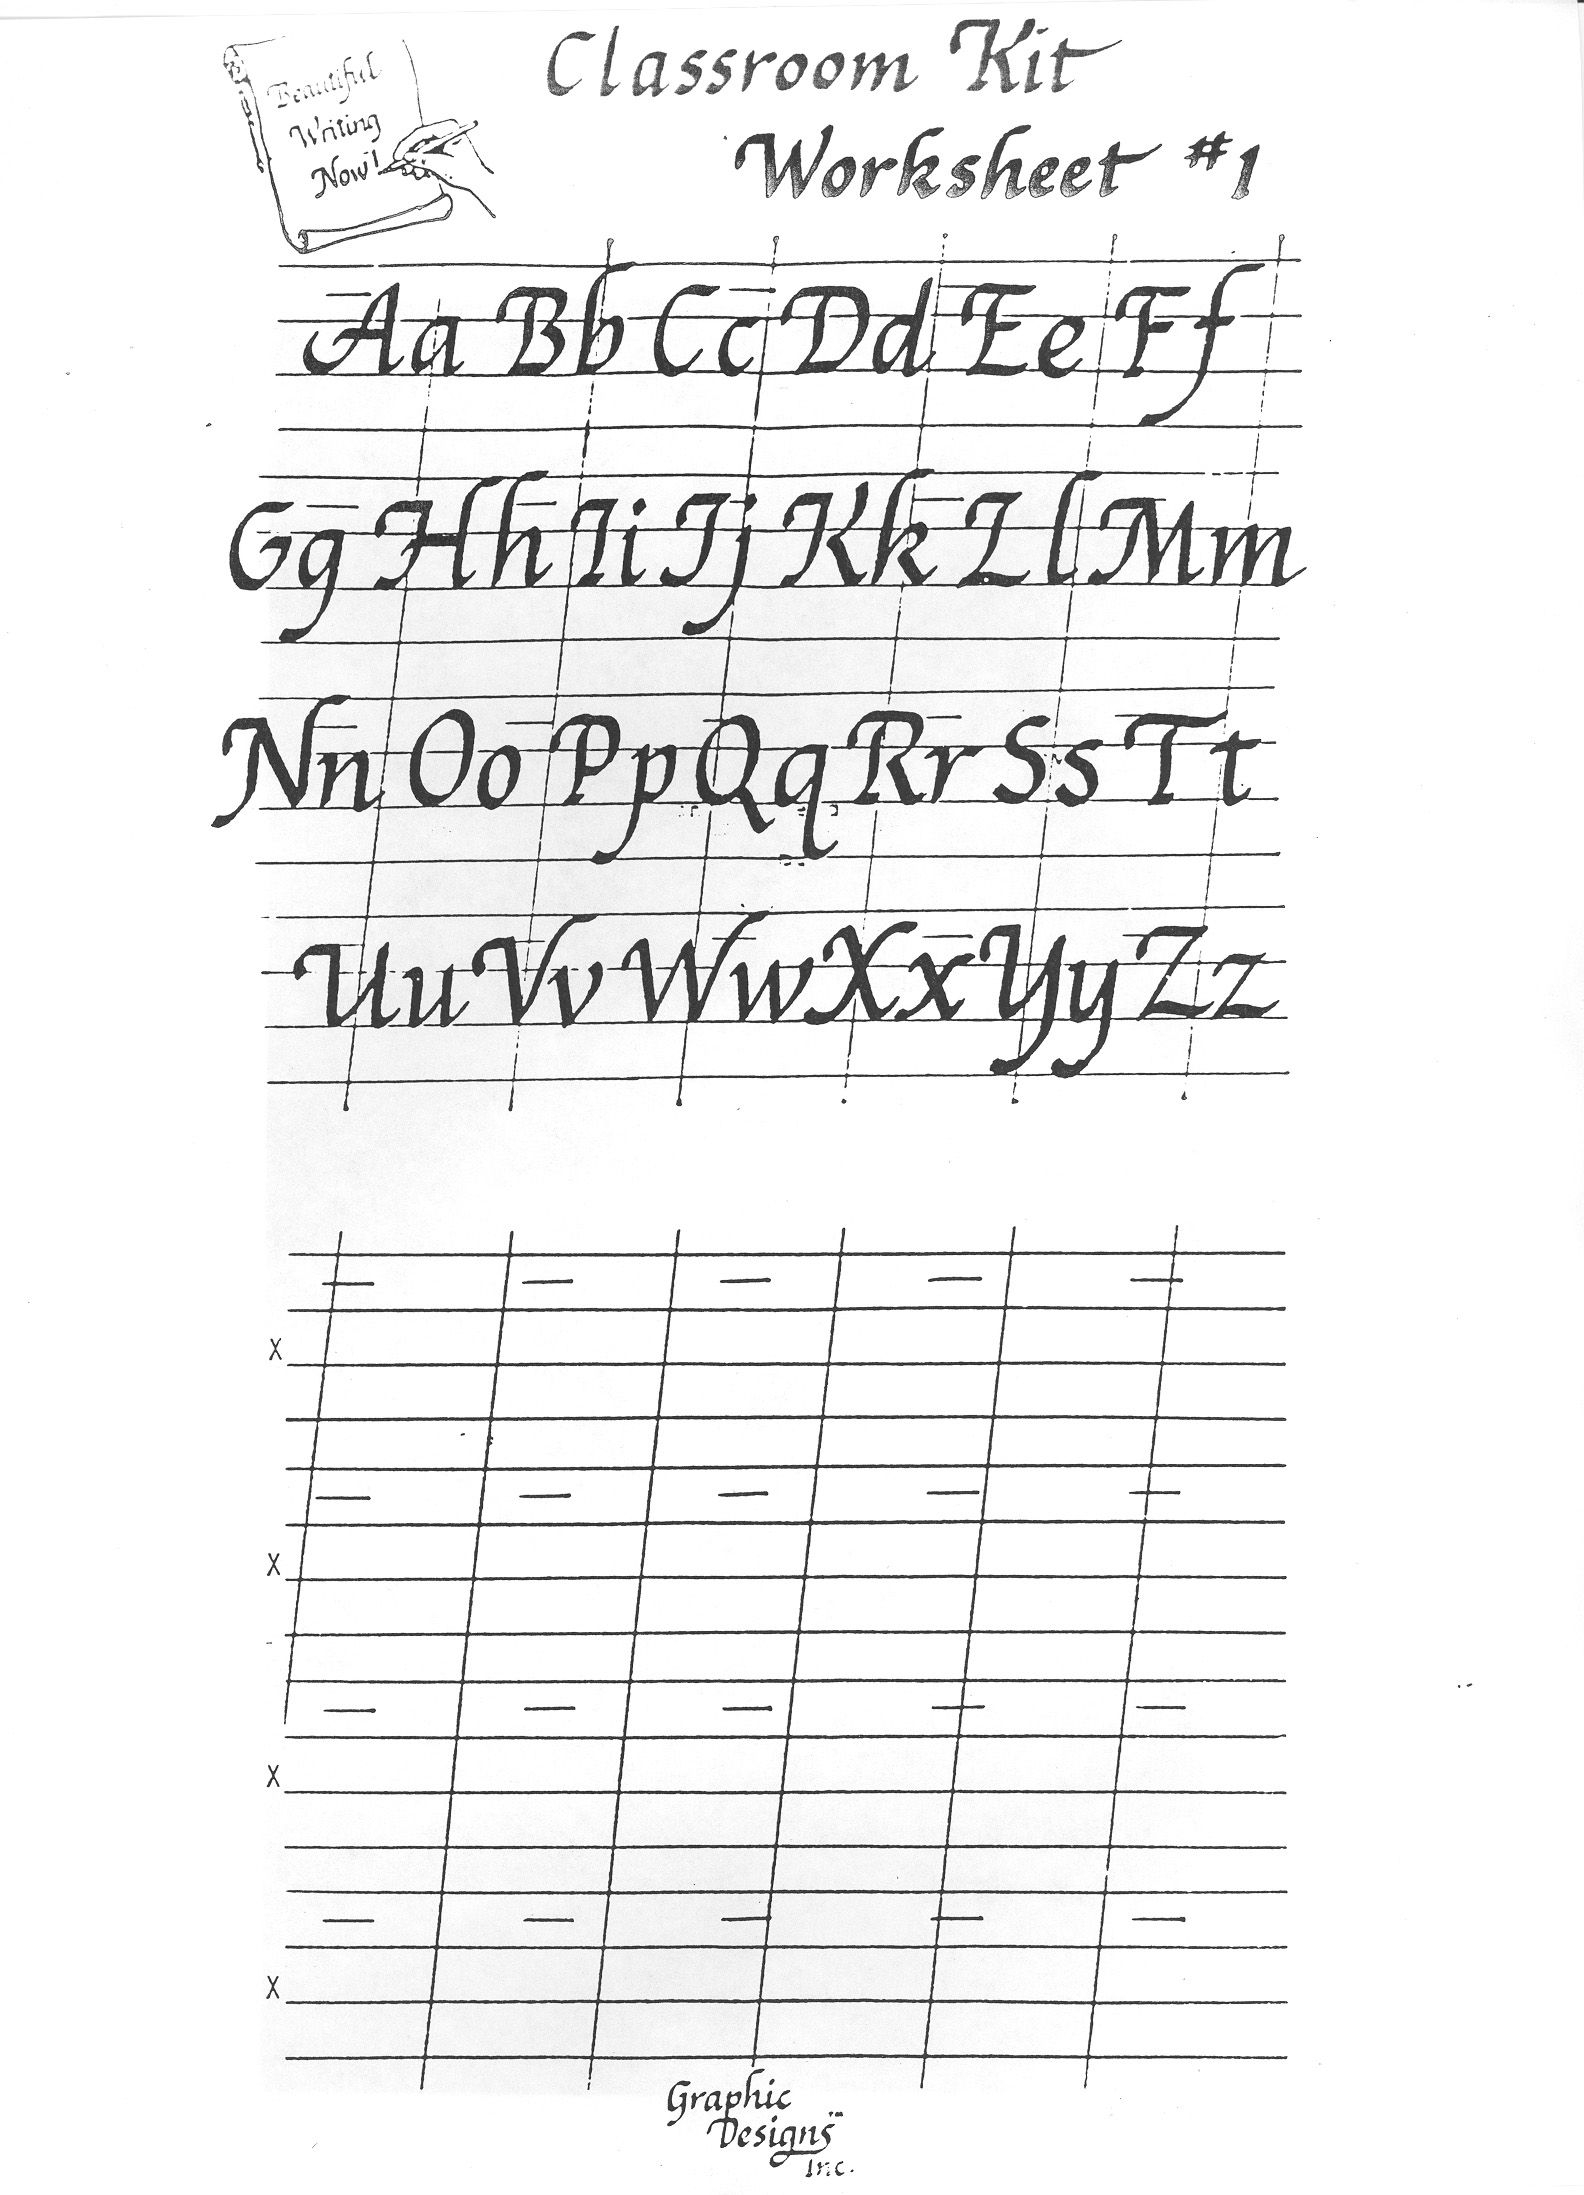 Free Printable Calligraphy Worksheets Lexia s Blog